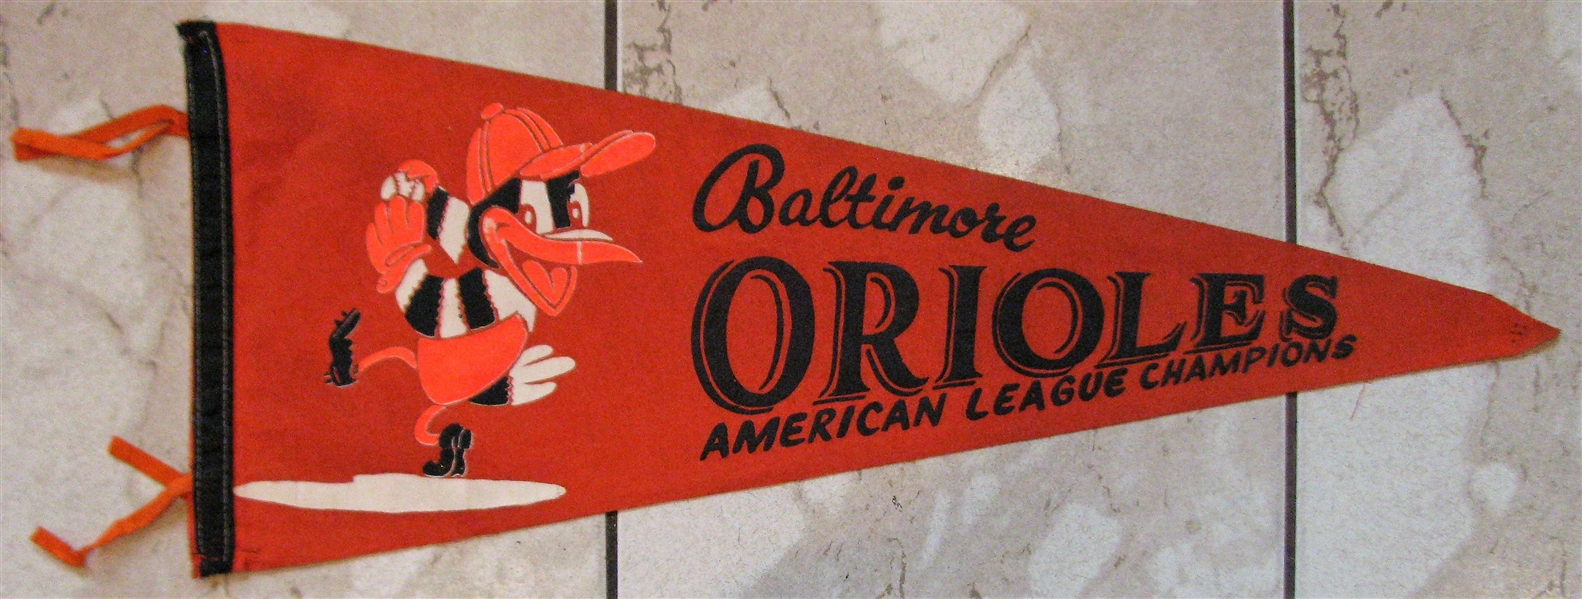 VINTAGE BALTIMORE ORIOLES AMERICAN LEAGUE CHAMPIONS PENNANT